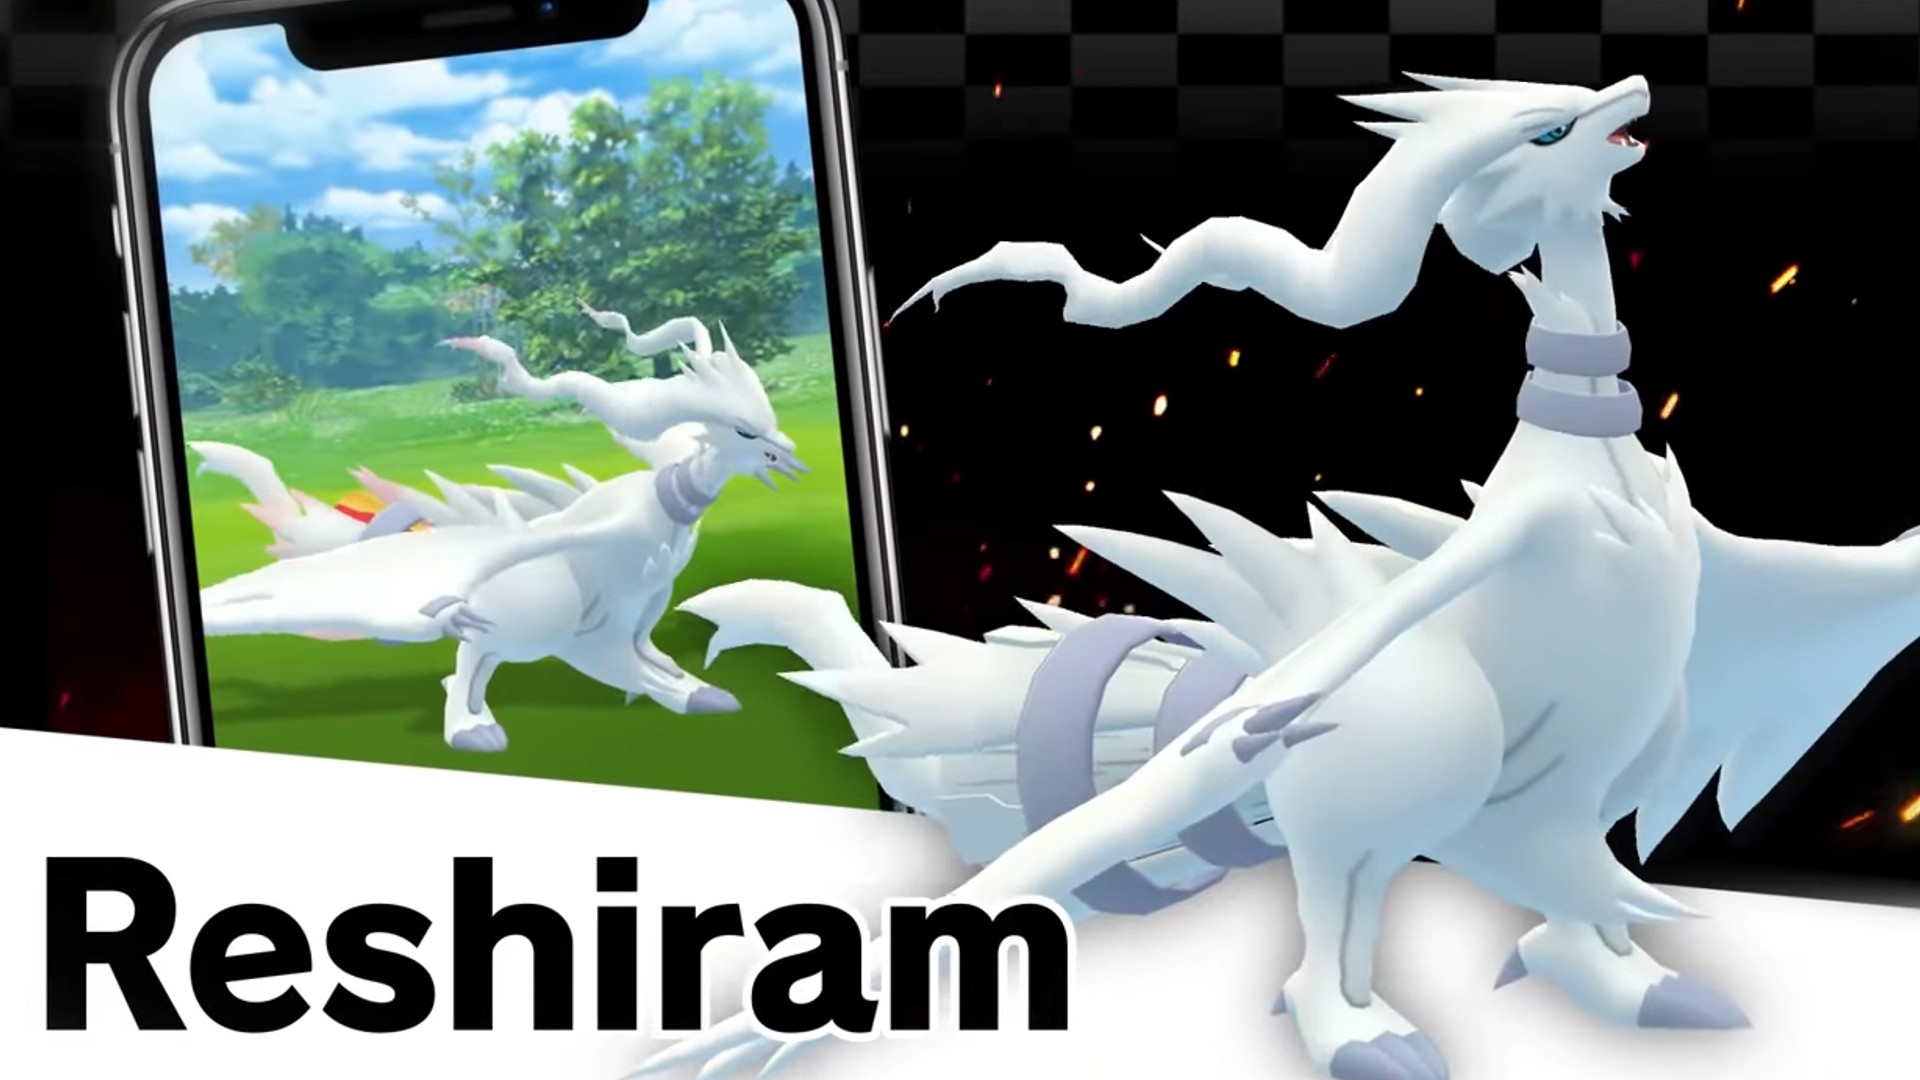 Pokemon Go Reshiram Raid Guide, best counters and how to catch a Shiny